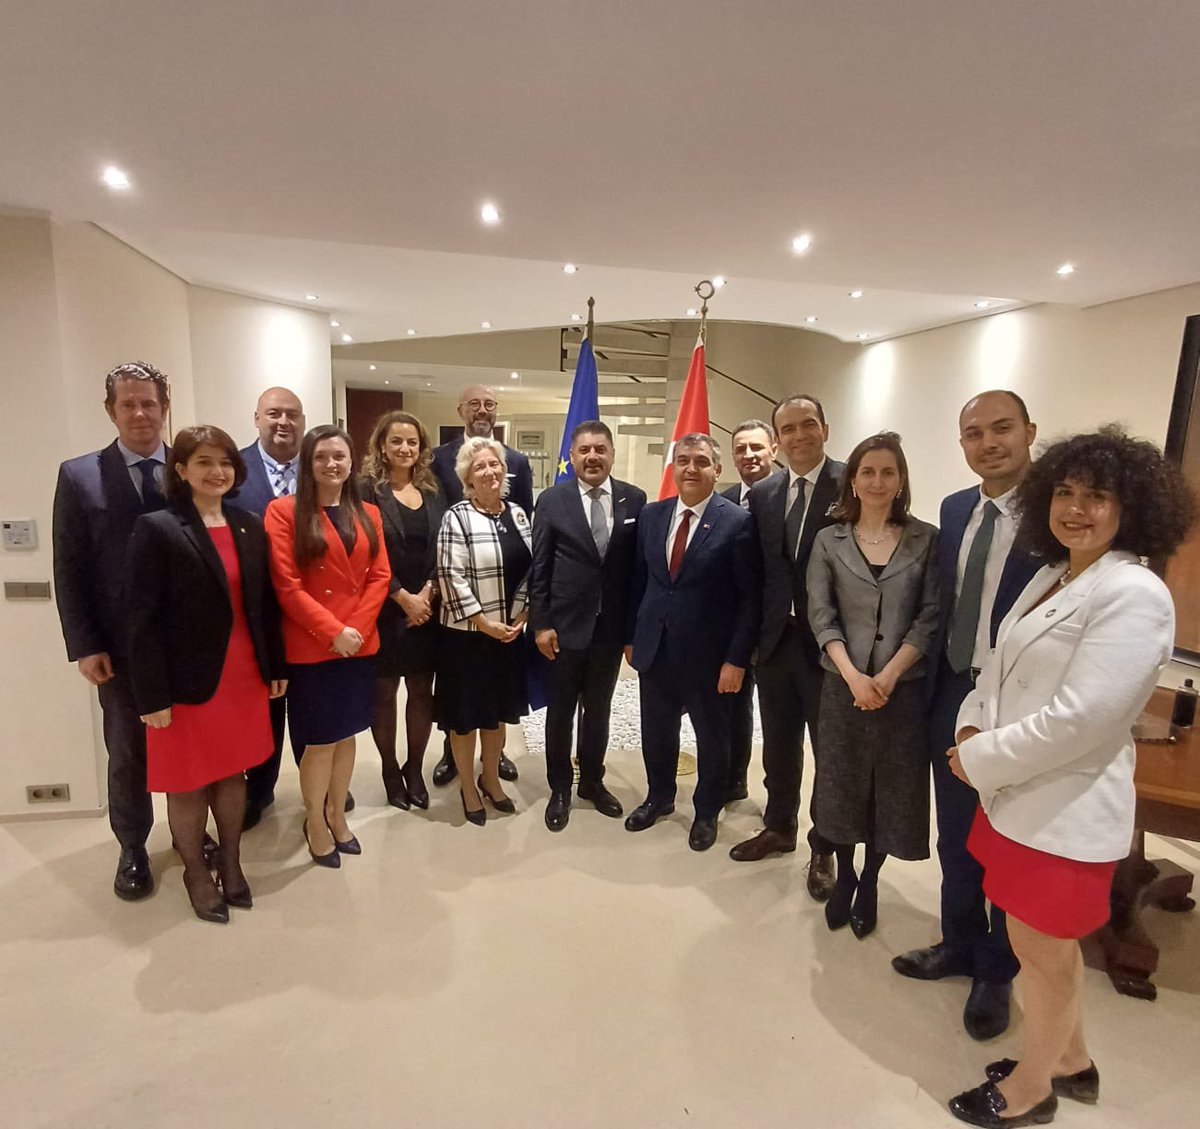 On the occasion of 🇪🇺Brussels visit of @turkonfed President @Ssonmez01 & his accompanying delegation, we came together w/🇪🇺 colleagues @TC_AVBIRDT. Common expectations of 🇹🇷&🇪🇺 SMEs: modernization of 🇹🇷🇪🇺customs union, visa facilitation & cooperation on green&digital transition.